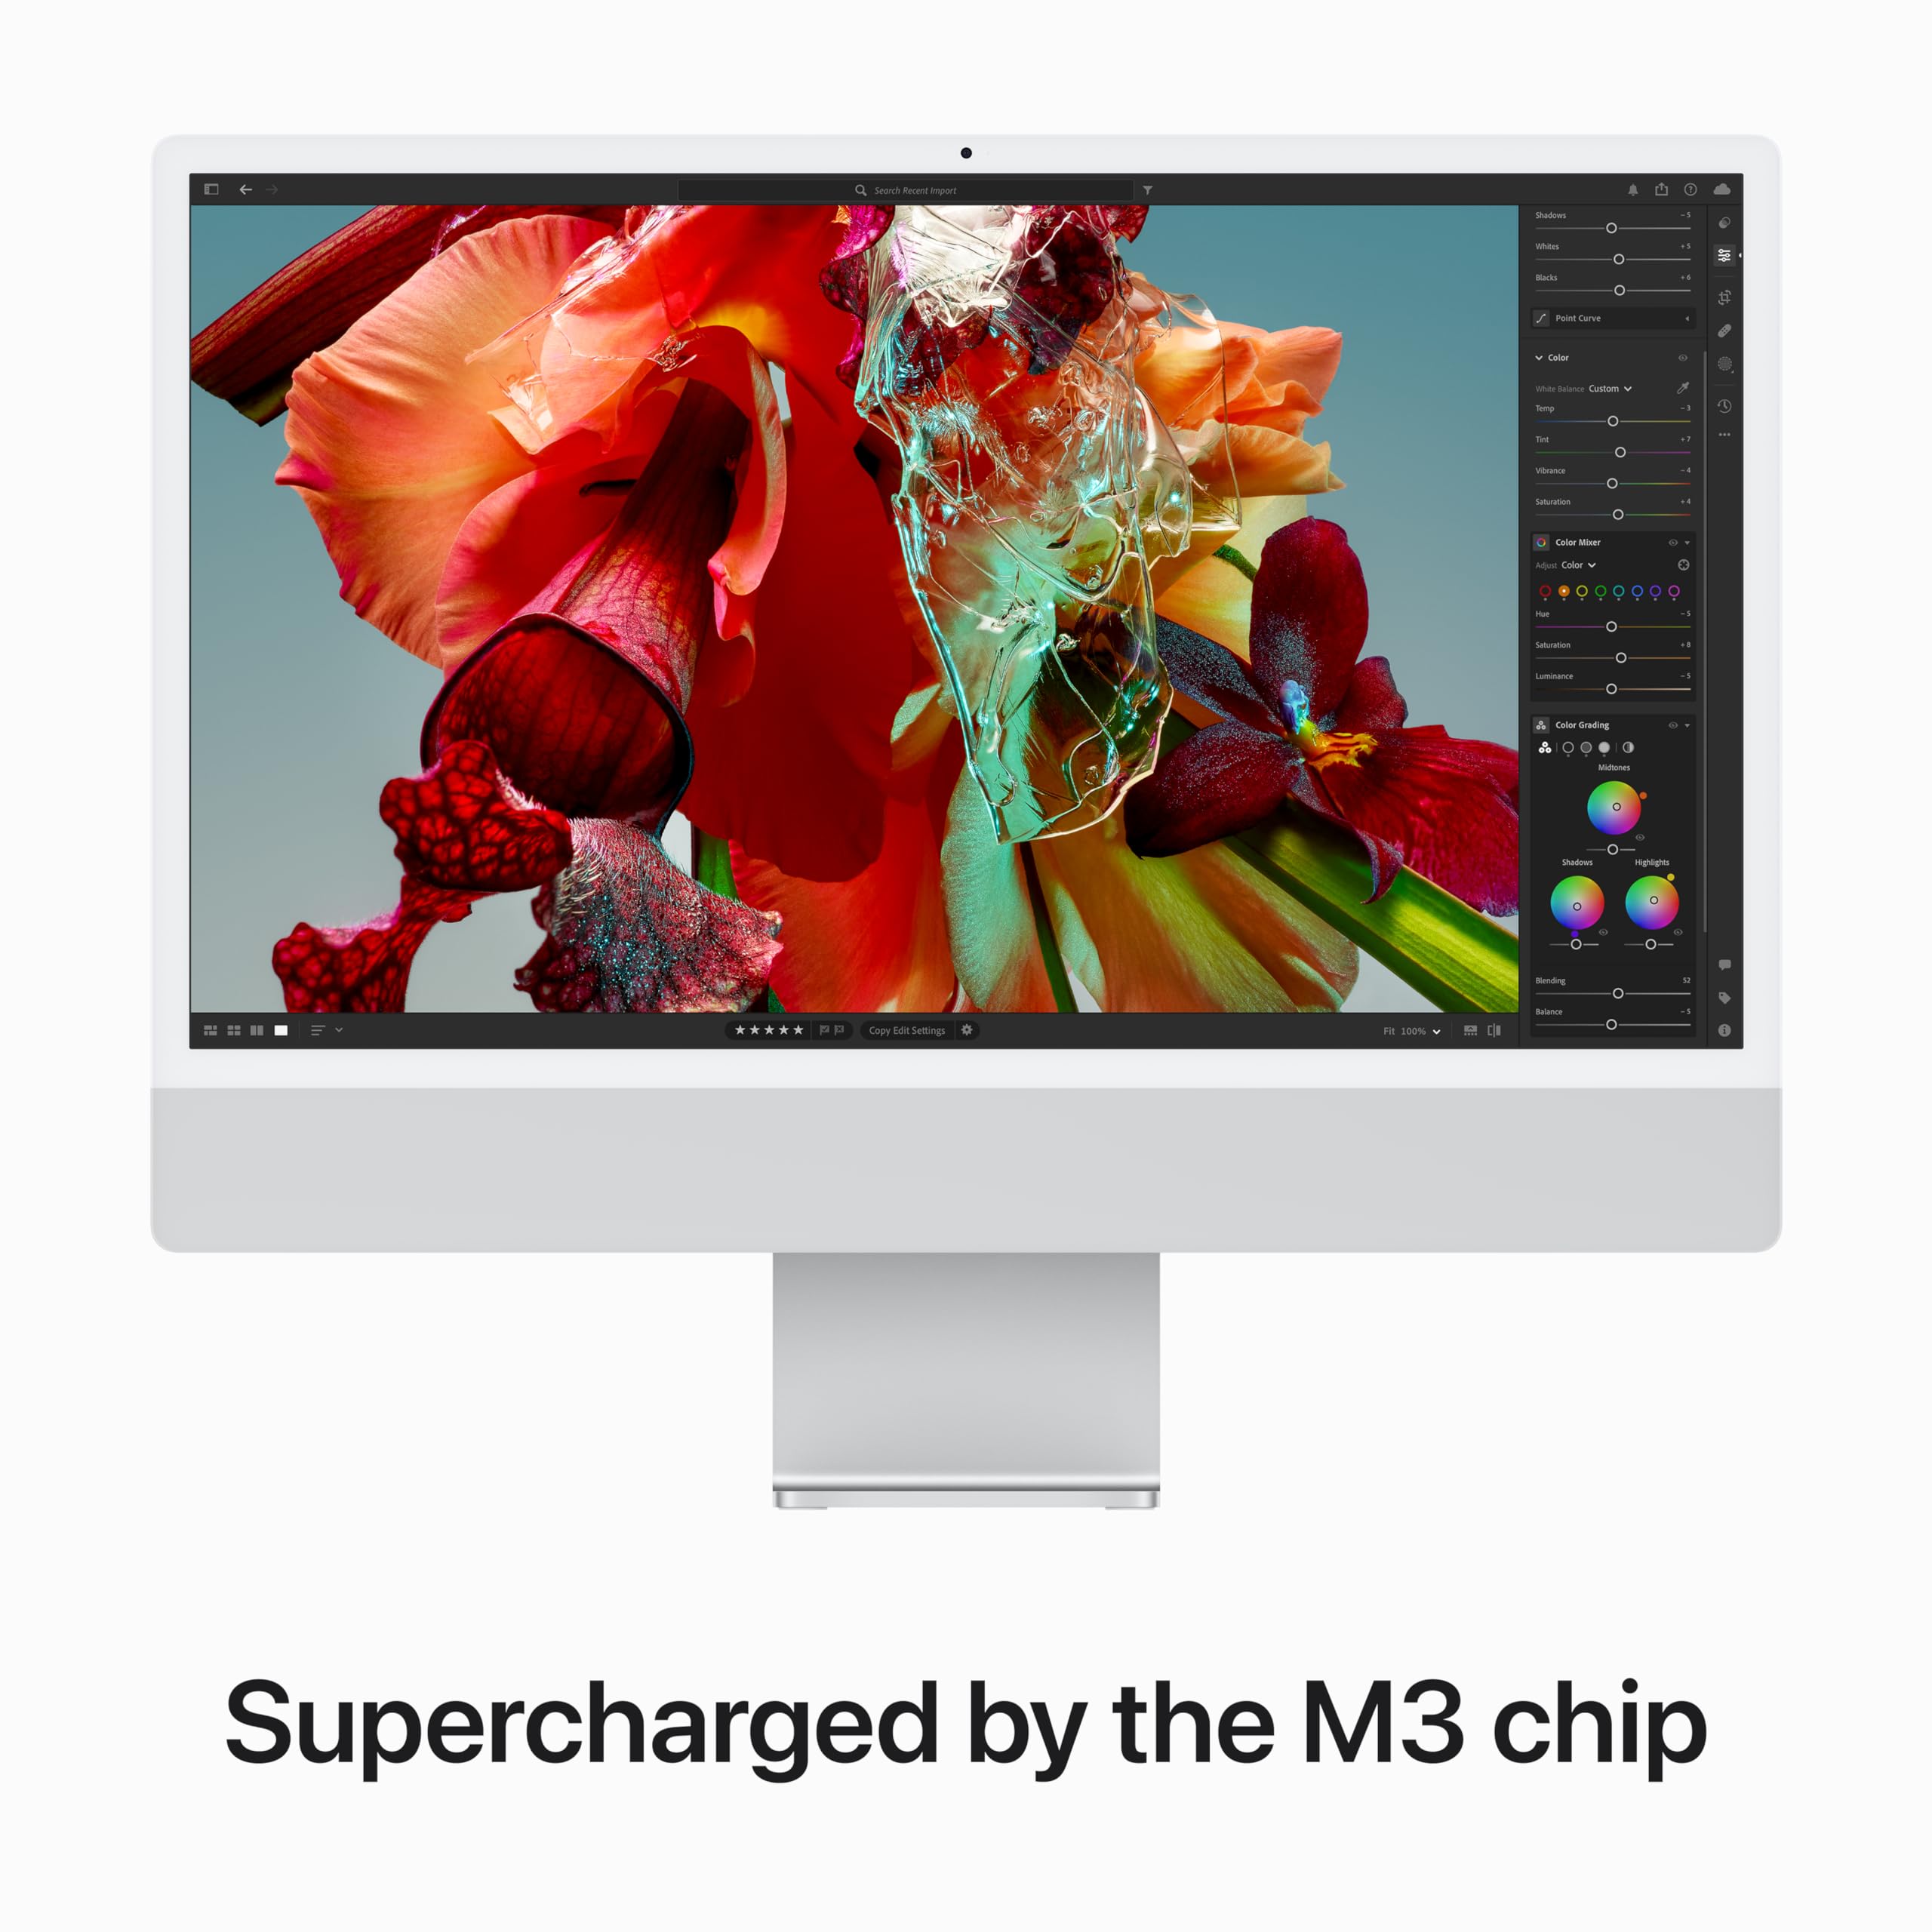 Apple 2023 iMac All-in-One Desktop Computer with M3 chip: 8-core CPU, 10-core GPU, 24-inch Retina Display, 8GB Unified Memory, 256GB SSD Storage, Matching Accessories. Works with iPhone/iPad; Silver